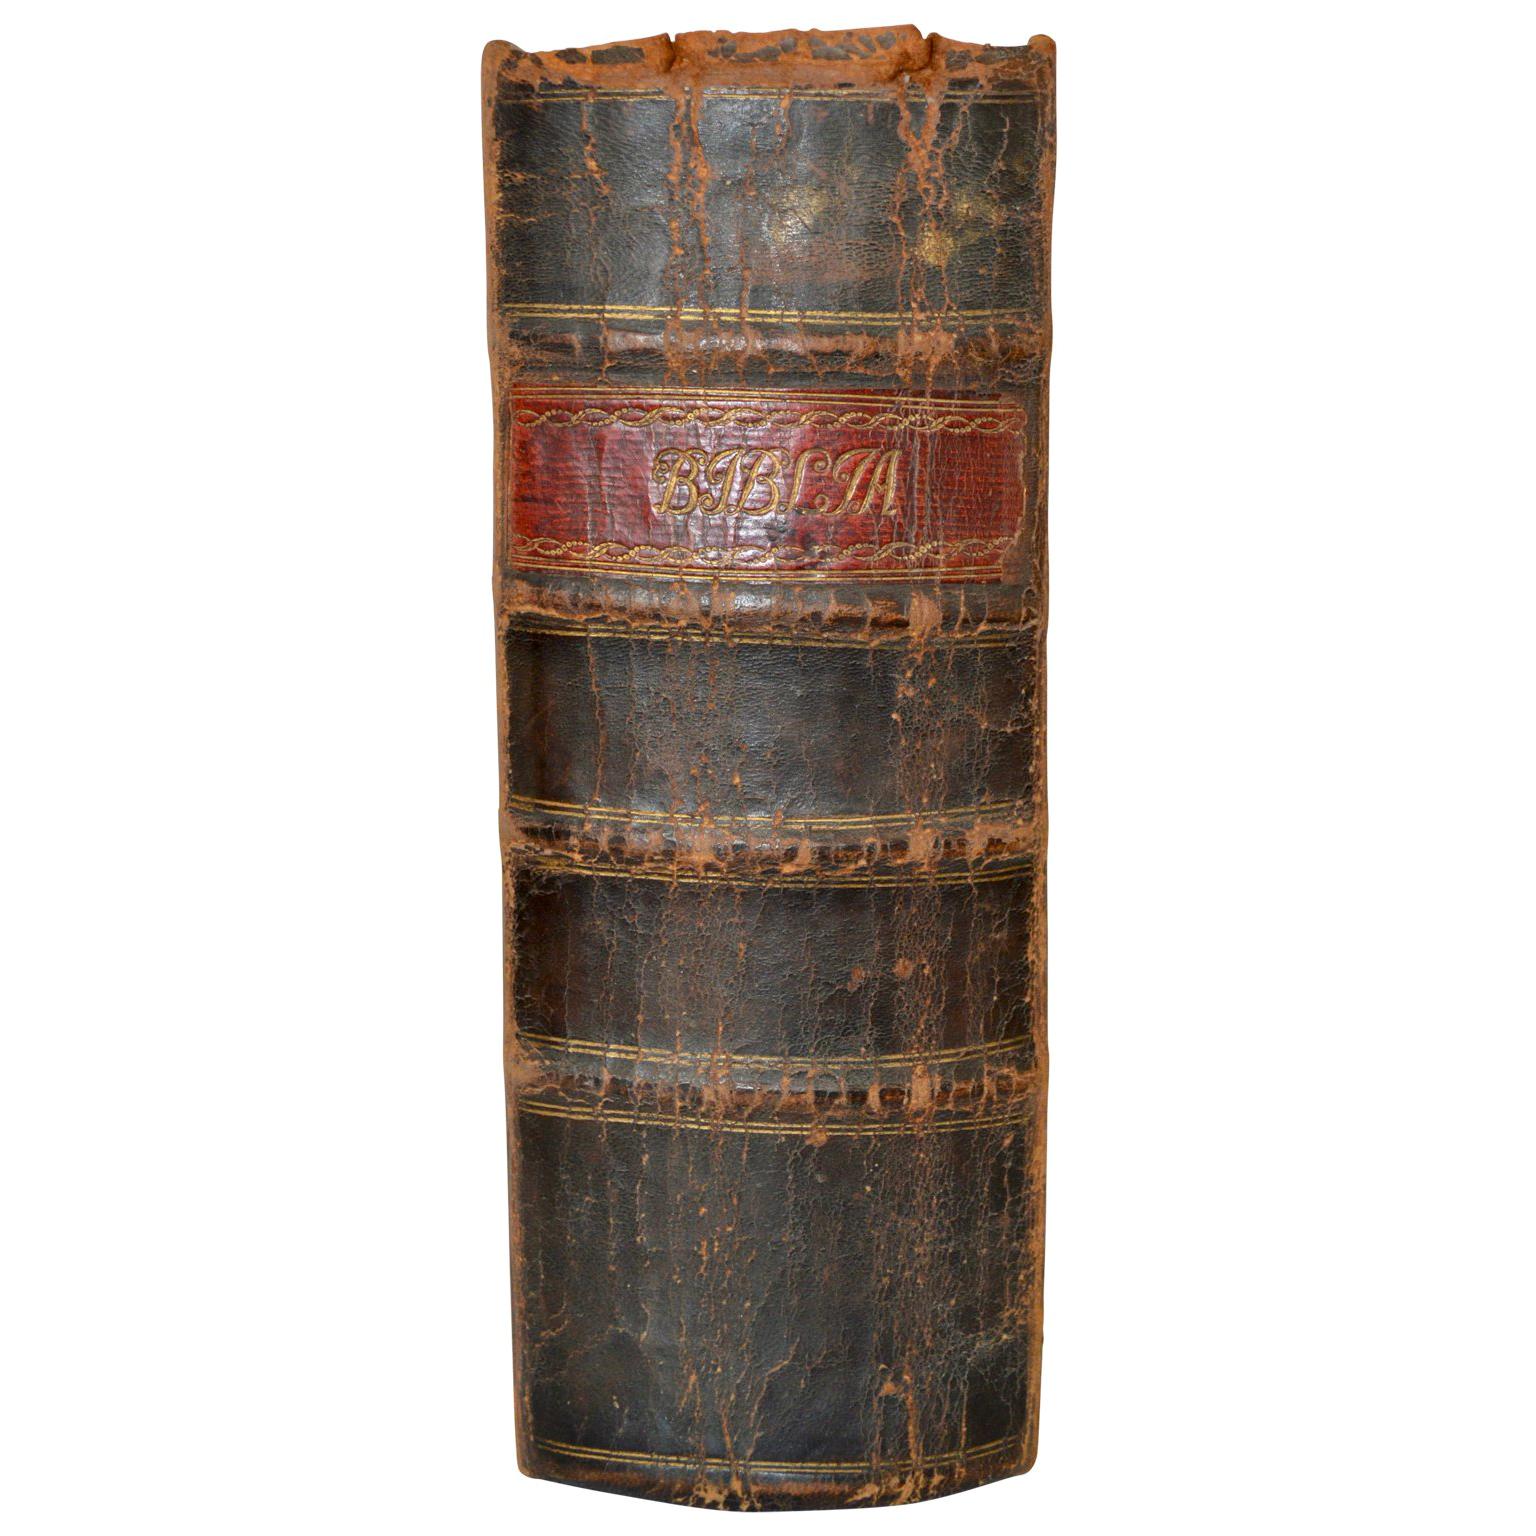 Antique Danish Leather-Bound Bible Book From 1802